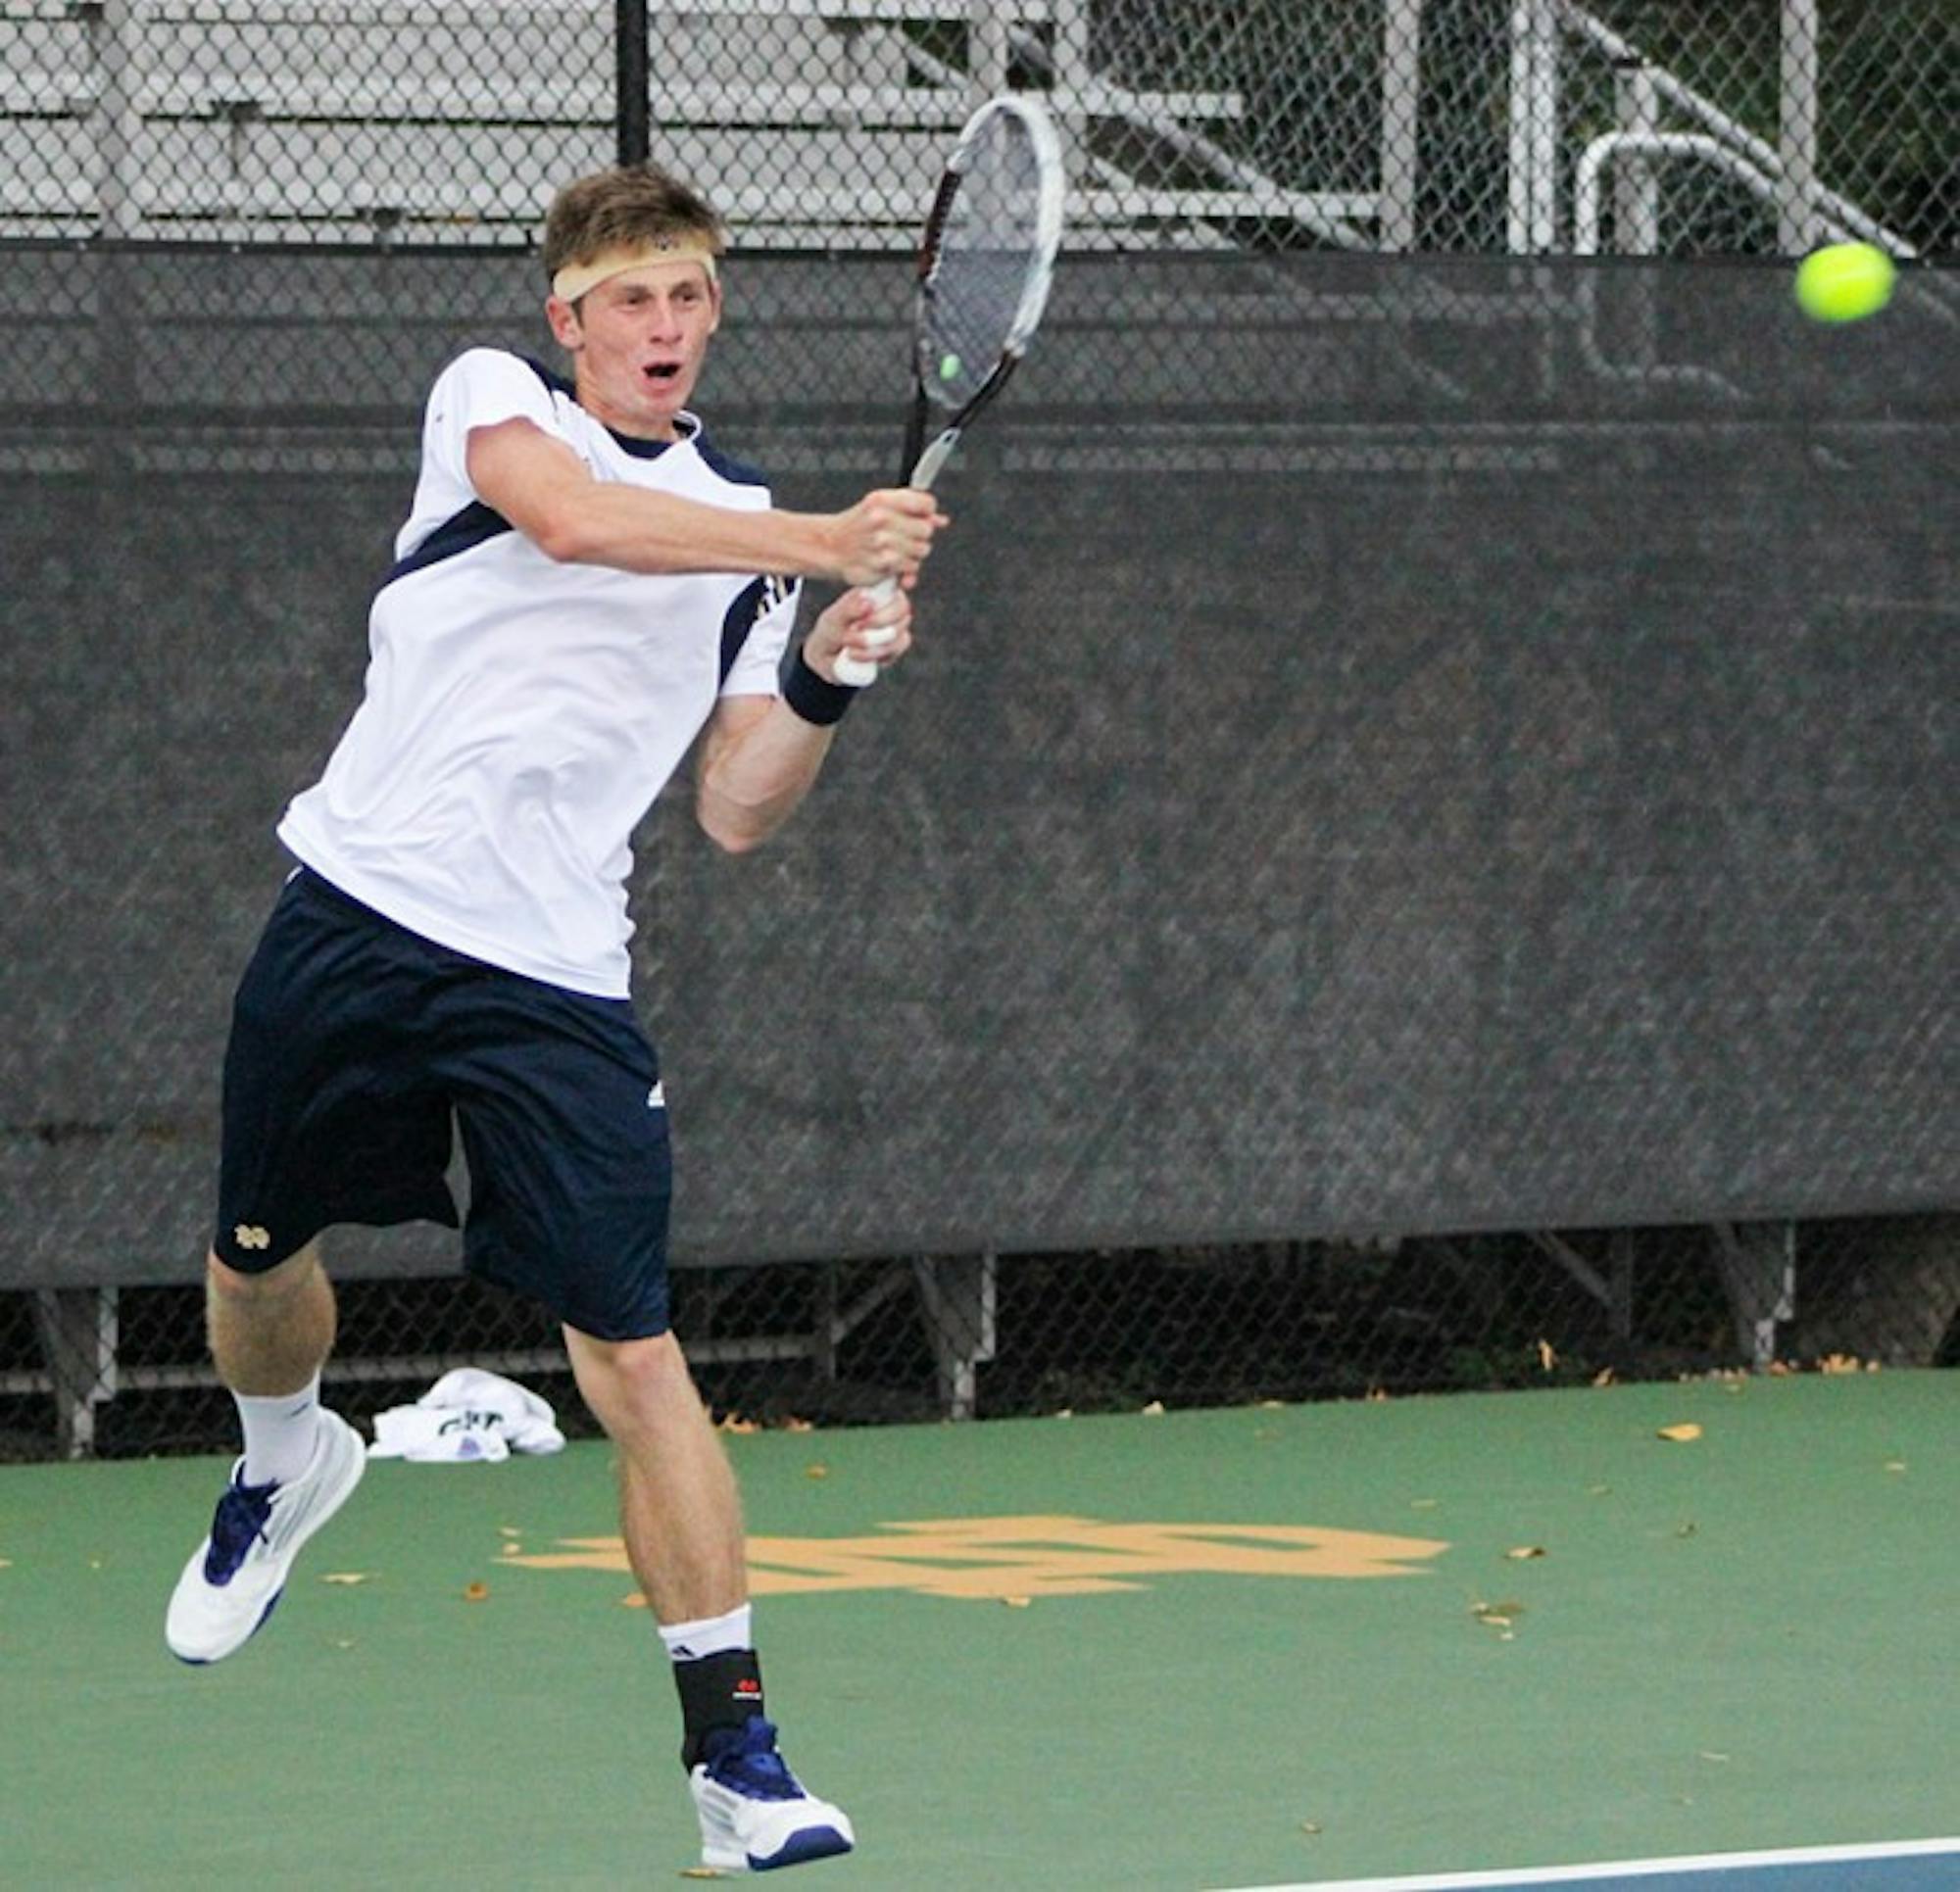 Sophomore Alex Lawson returns a shot in the Bobby Bayliss Invitational on Oct. 5. Lawson and senior Greg Andrews won their doubles matches against Kentucky and Minnesota on Friday and Saturday.